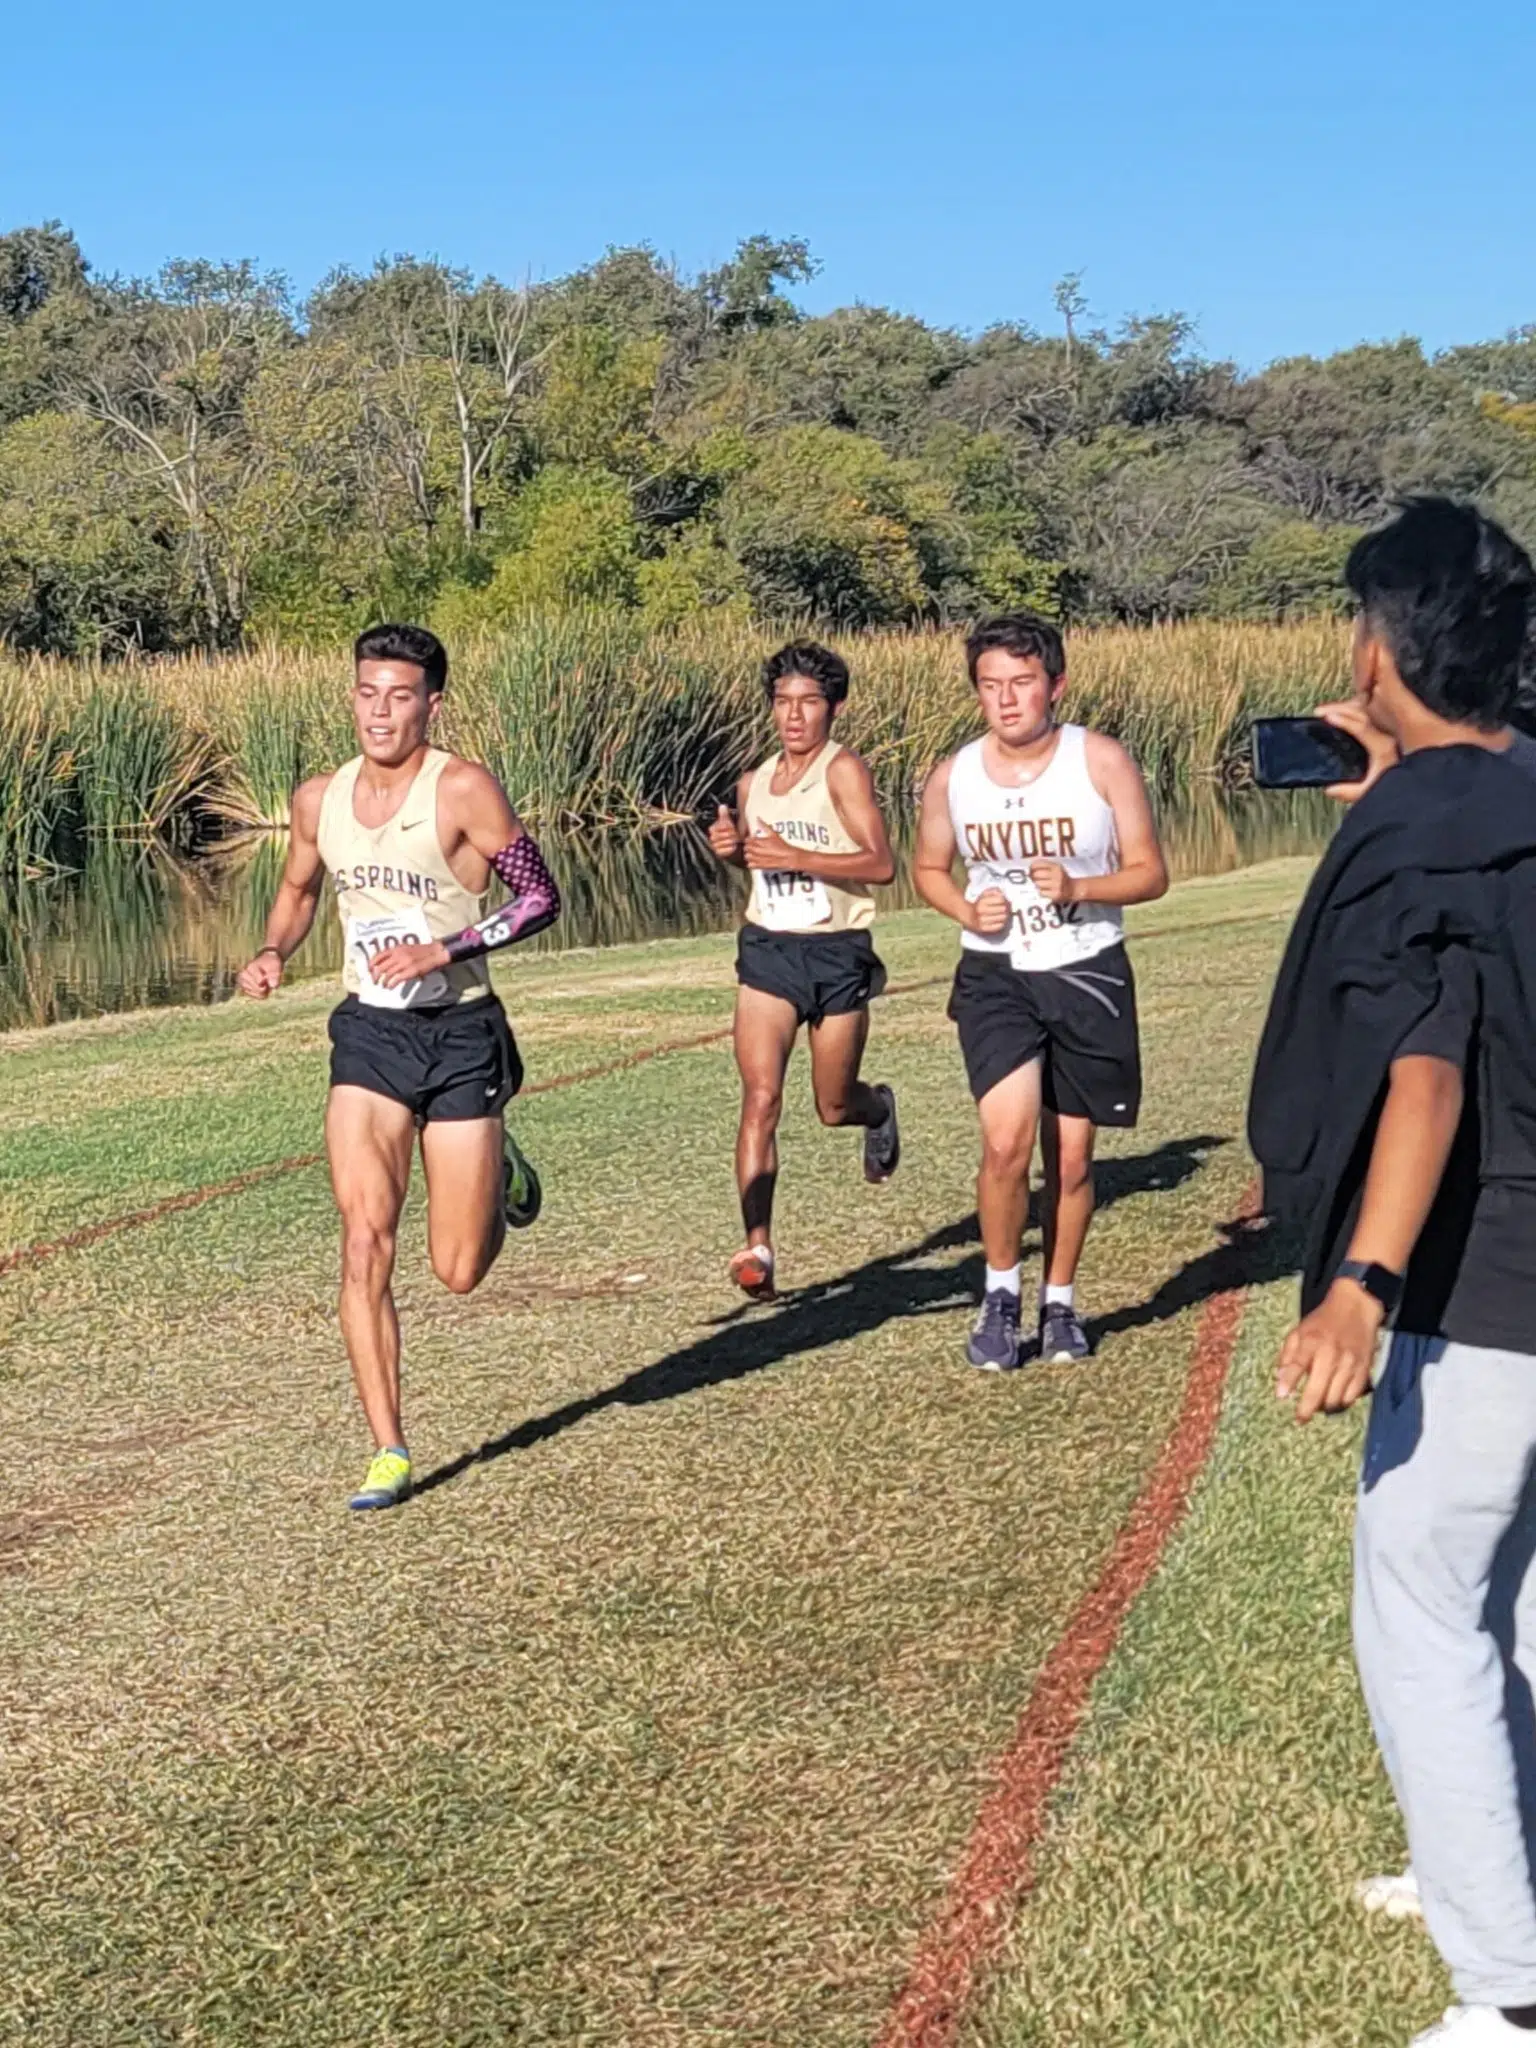 Big Spring Cross Country to Compete at State, Nov. 45th Kbest Media